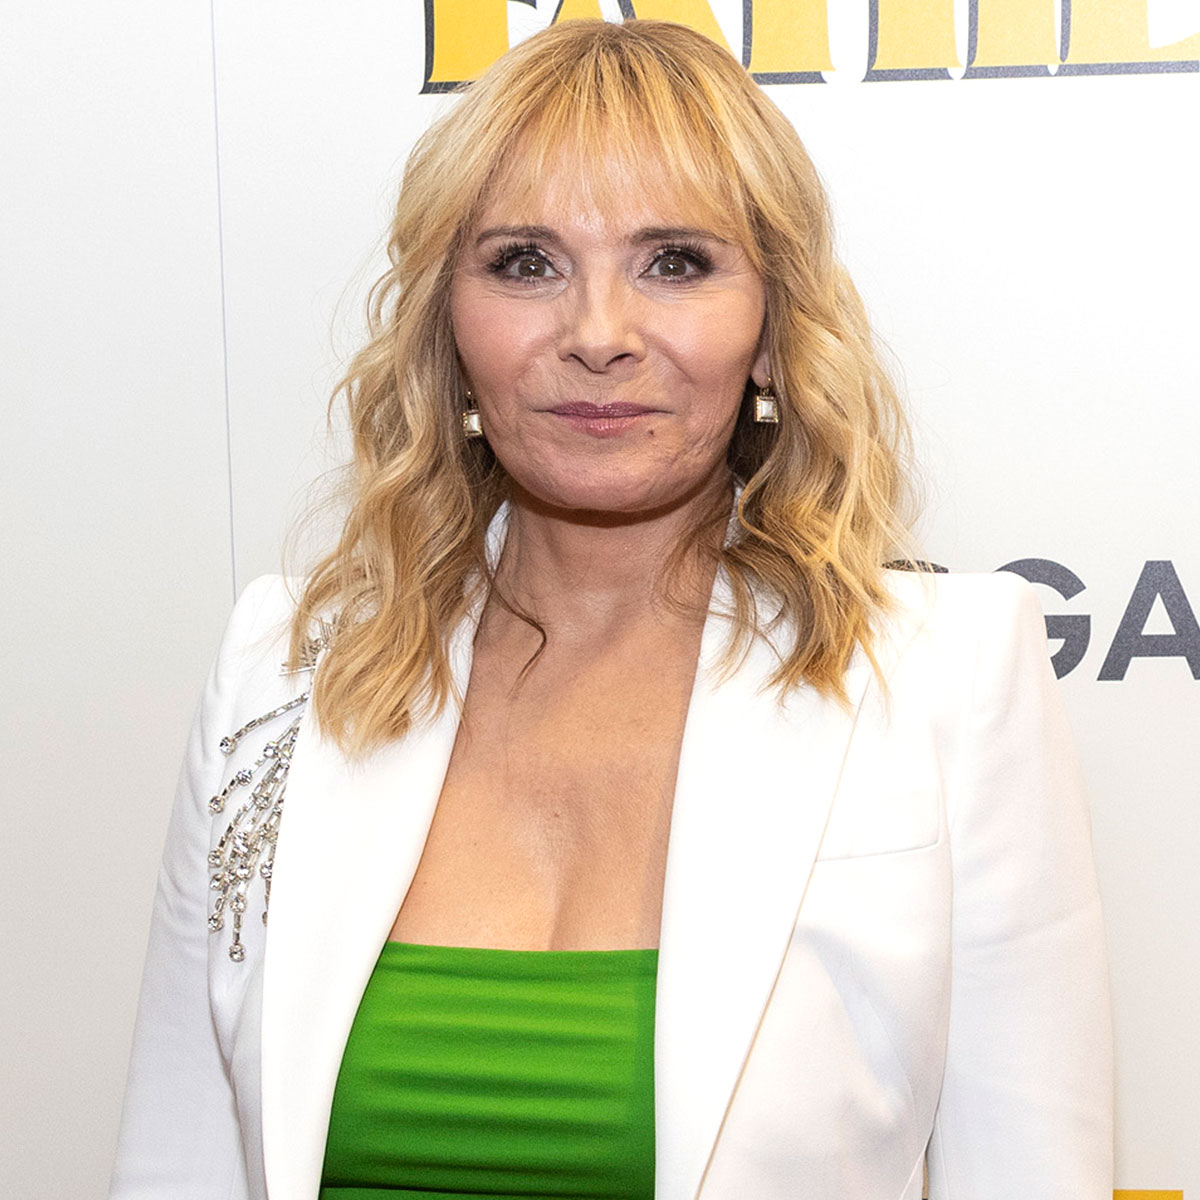 Kim Cattrall Talked About Moving On Before AJLT… Cameo News